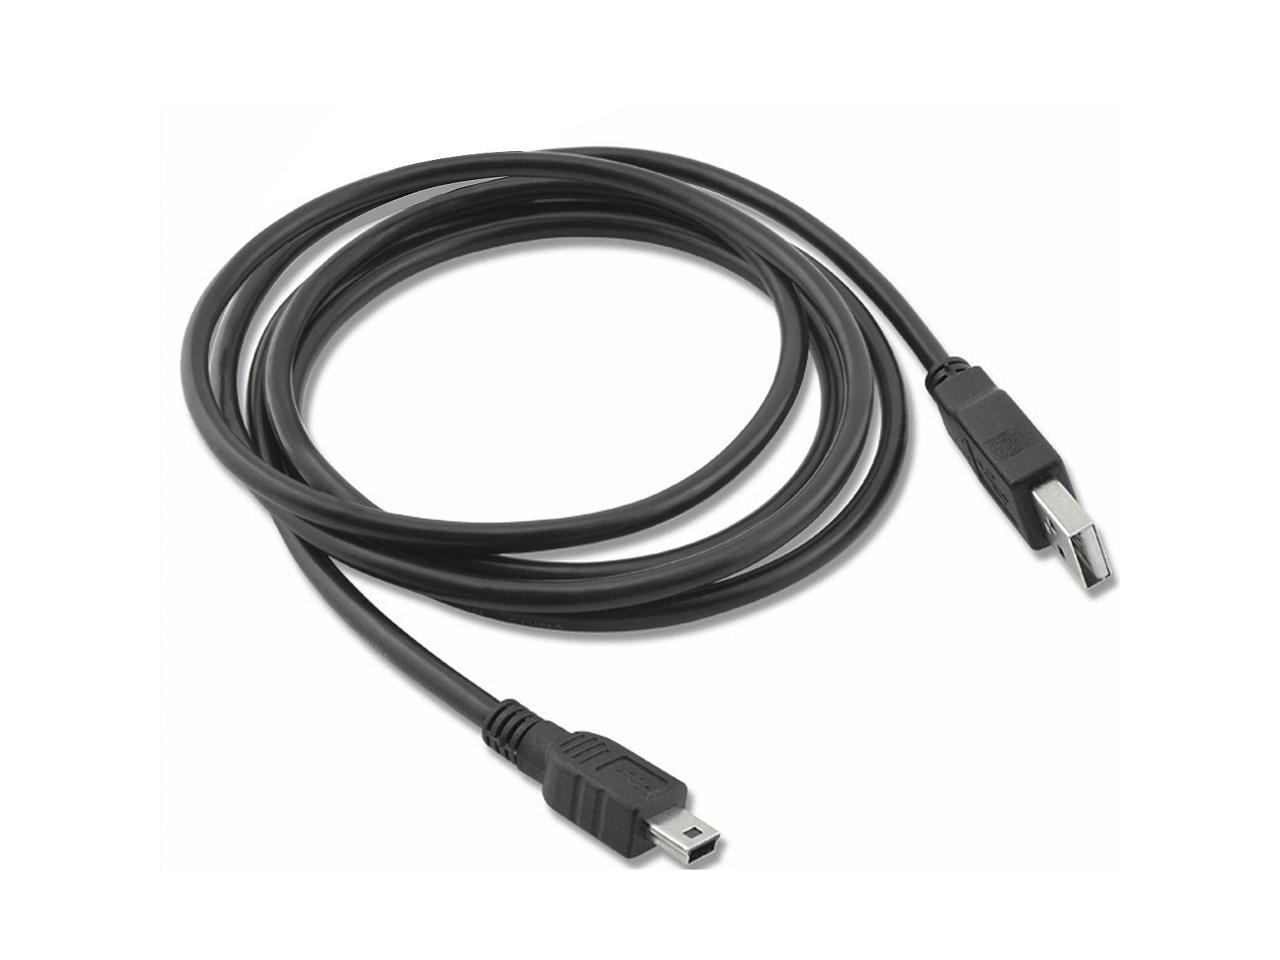 CANON PowerShot SD10 DIGITAL ELPH USB DATA CABLE LEAD FOR PC/MAC 